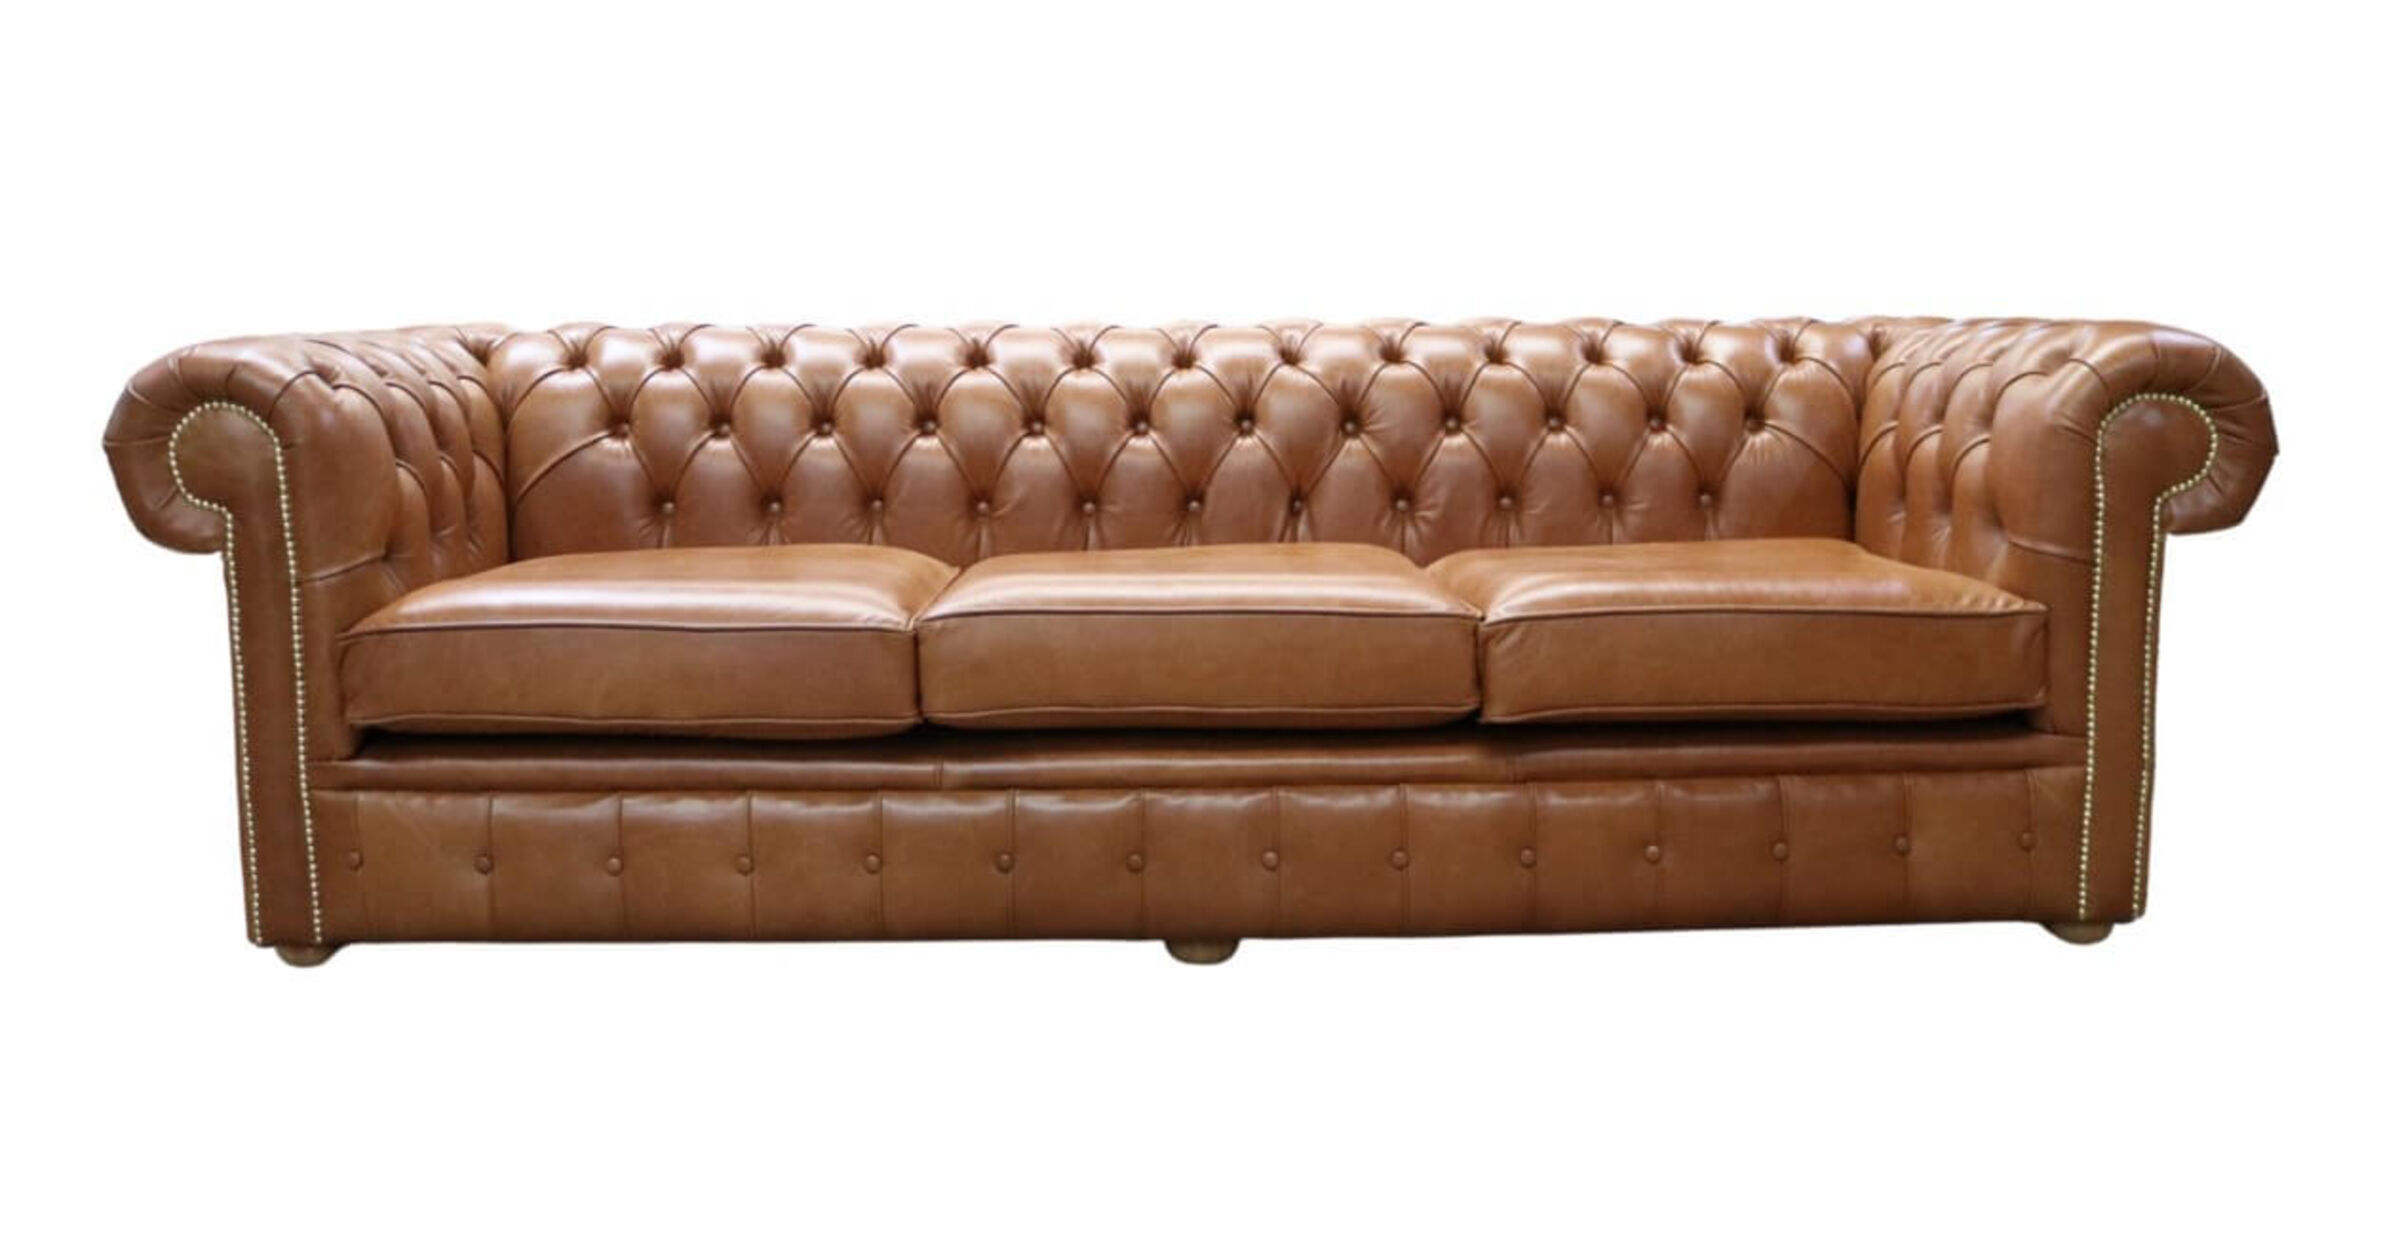 tan chesterfield sofa bed